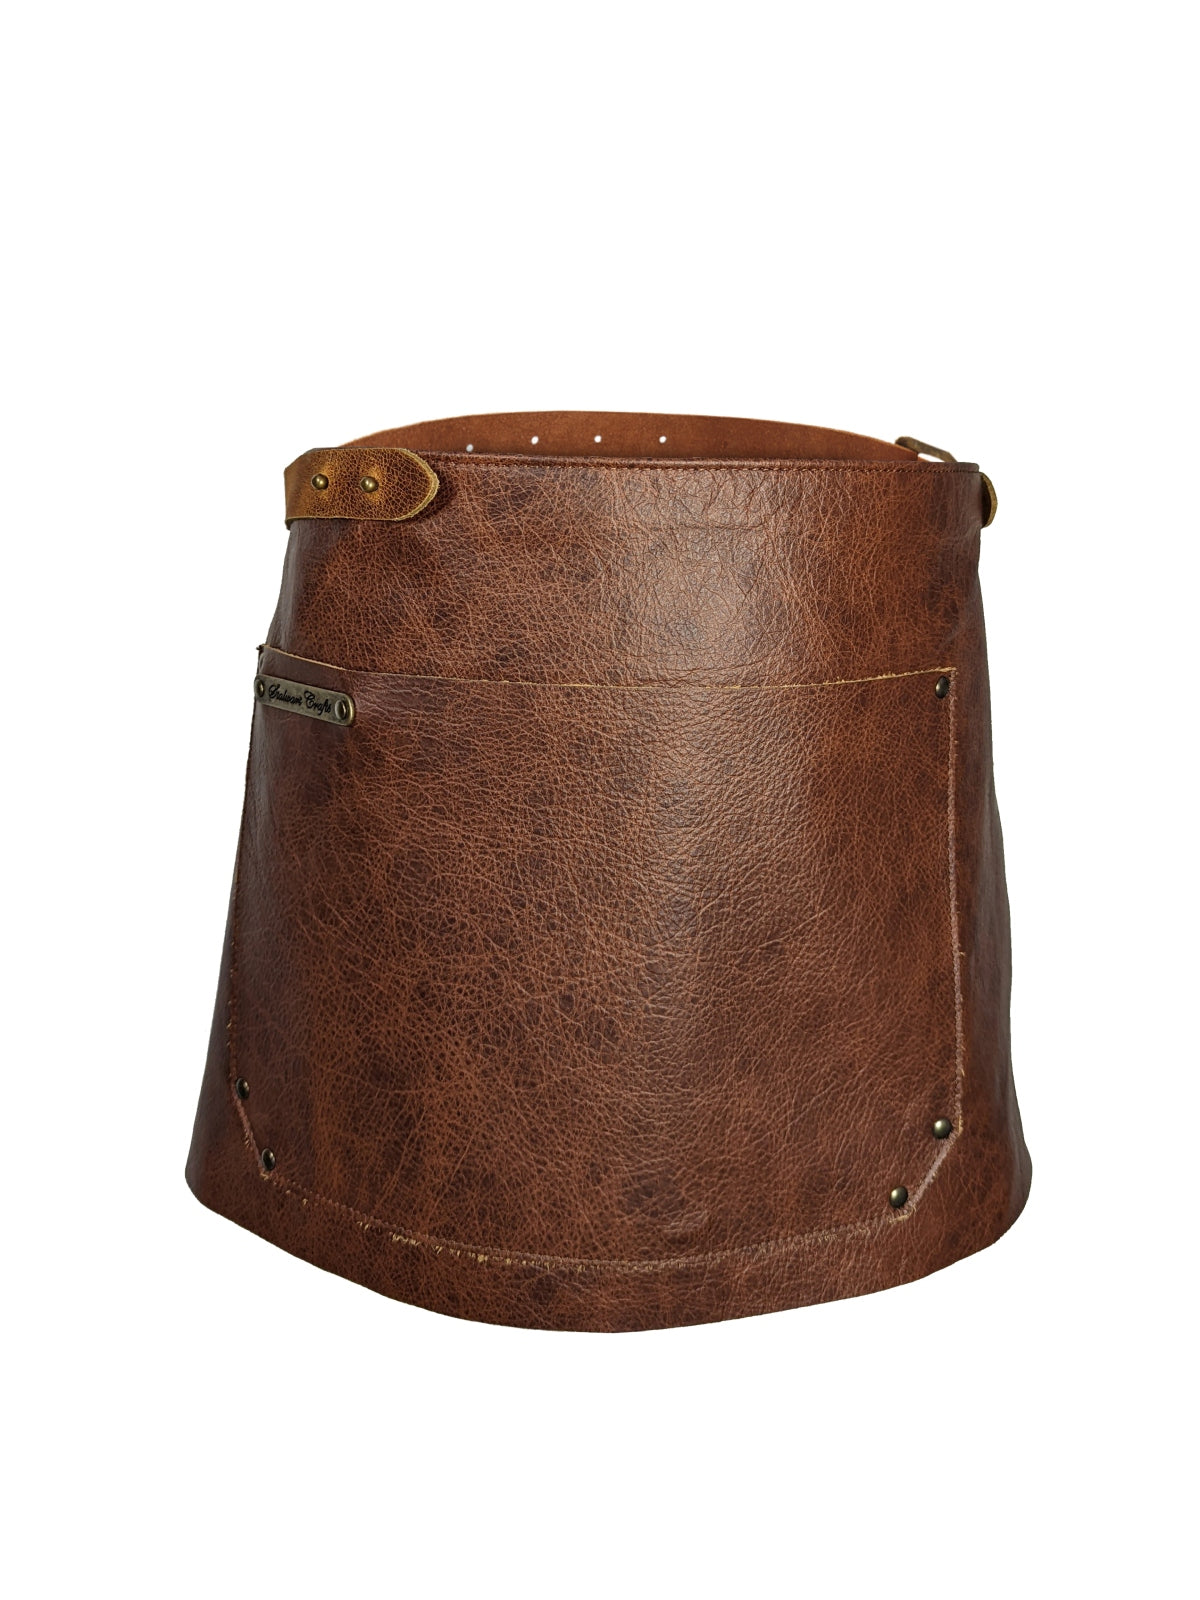 Leather Waist Apron Deluxe Brown by Stalwart -  ChefsCotton